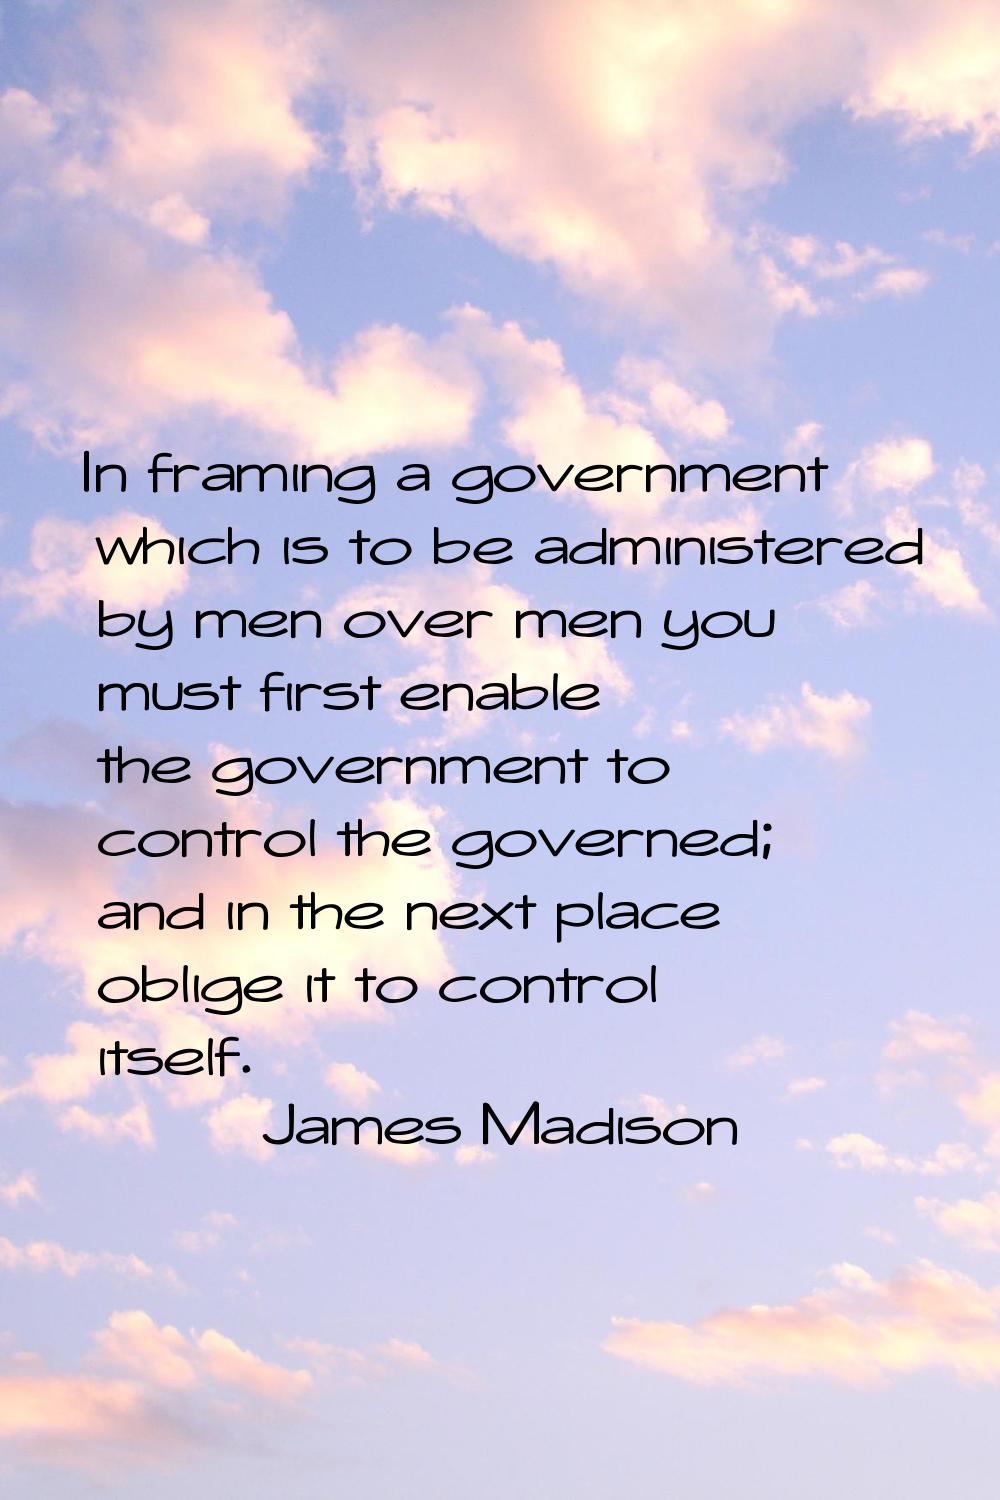 In framing a government which is to be administered by men over men you must first enable the gover